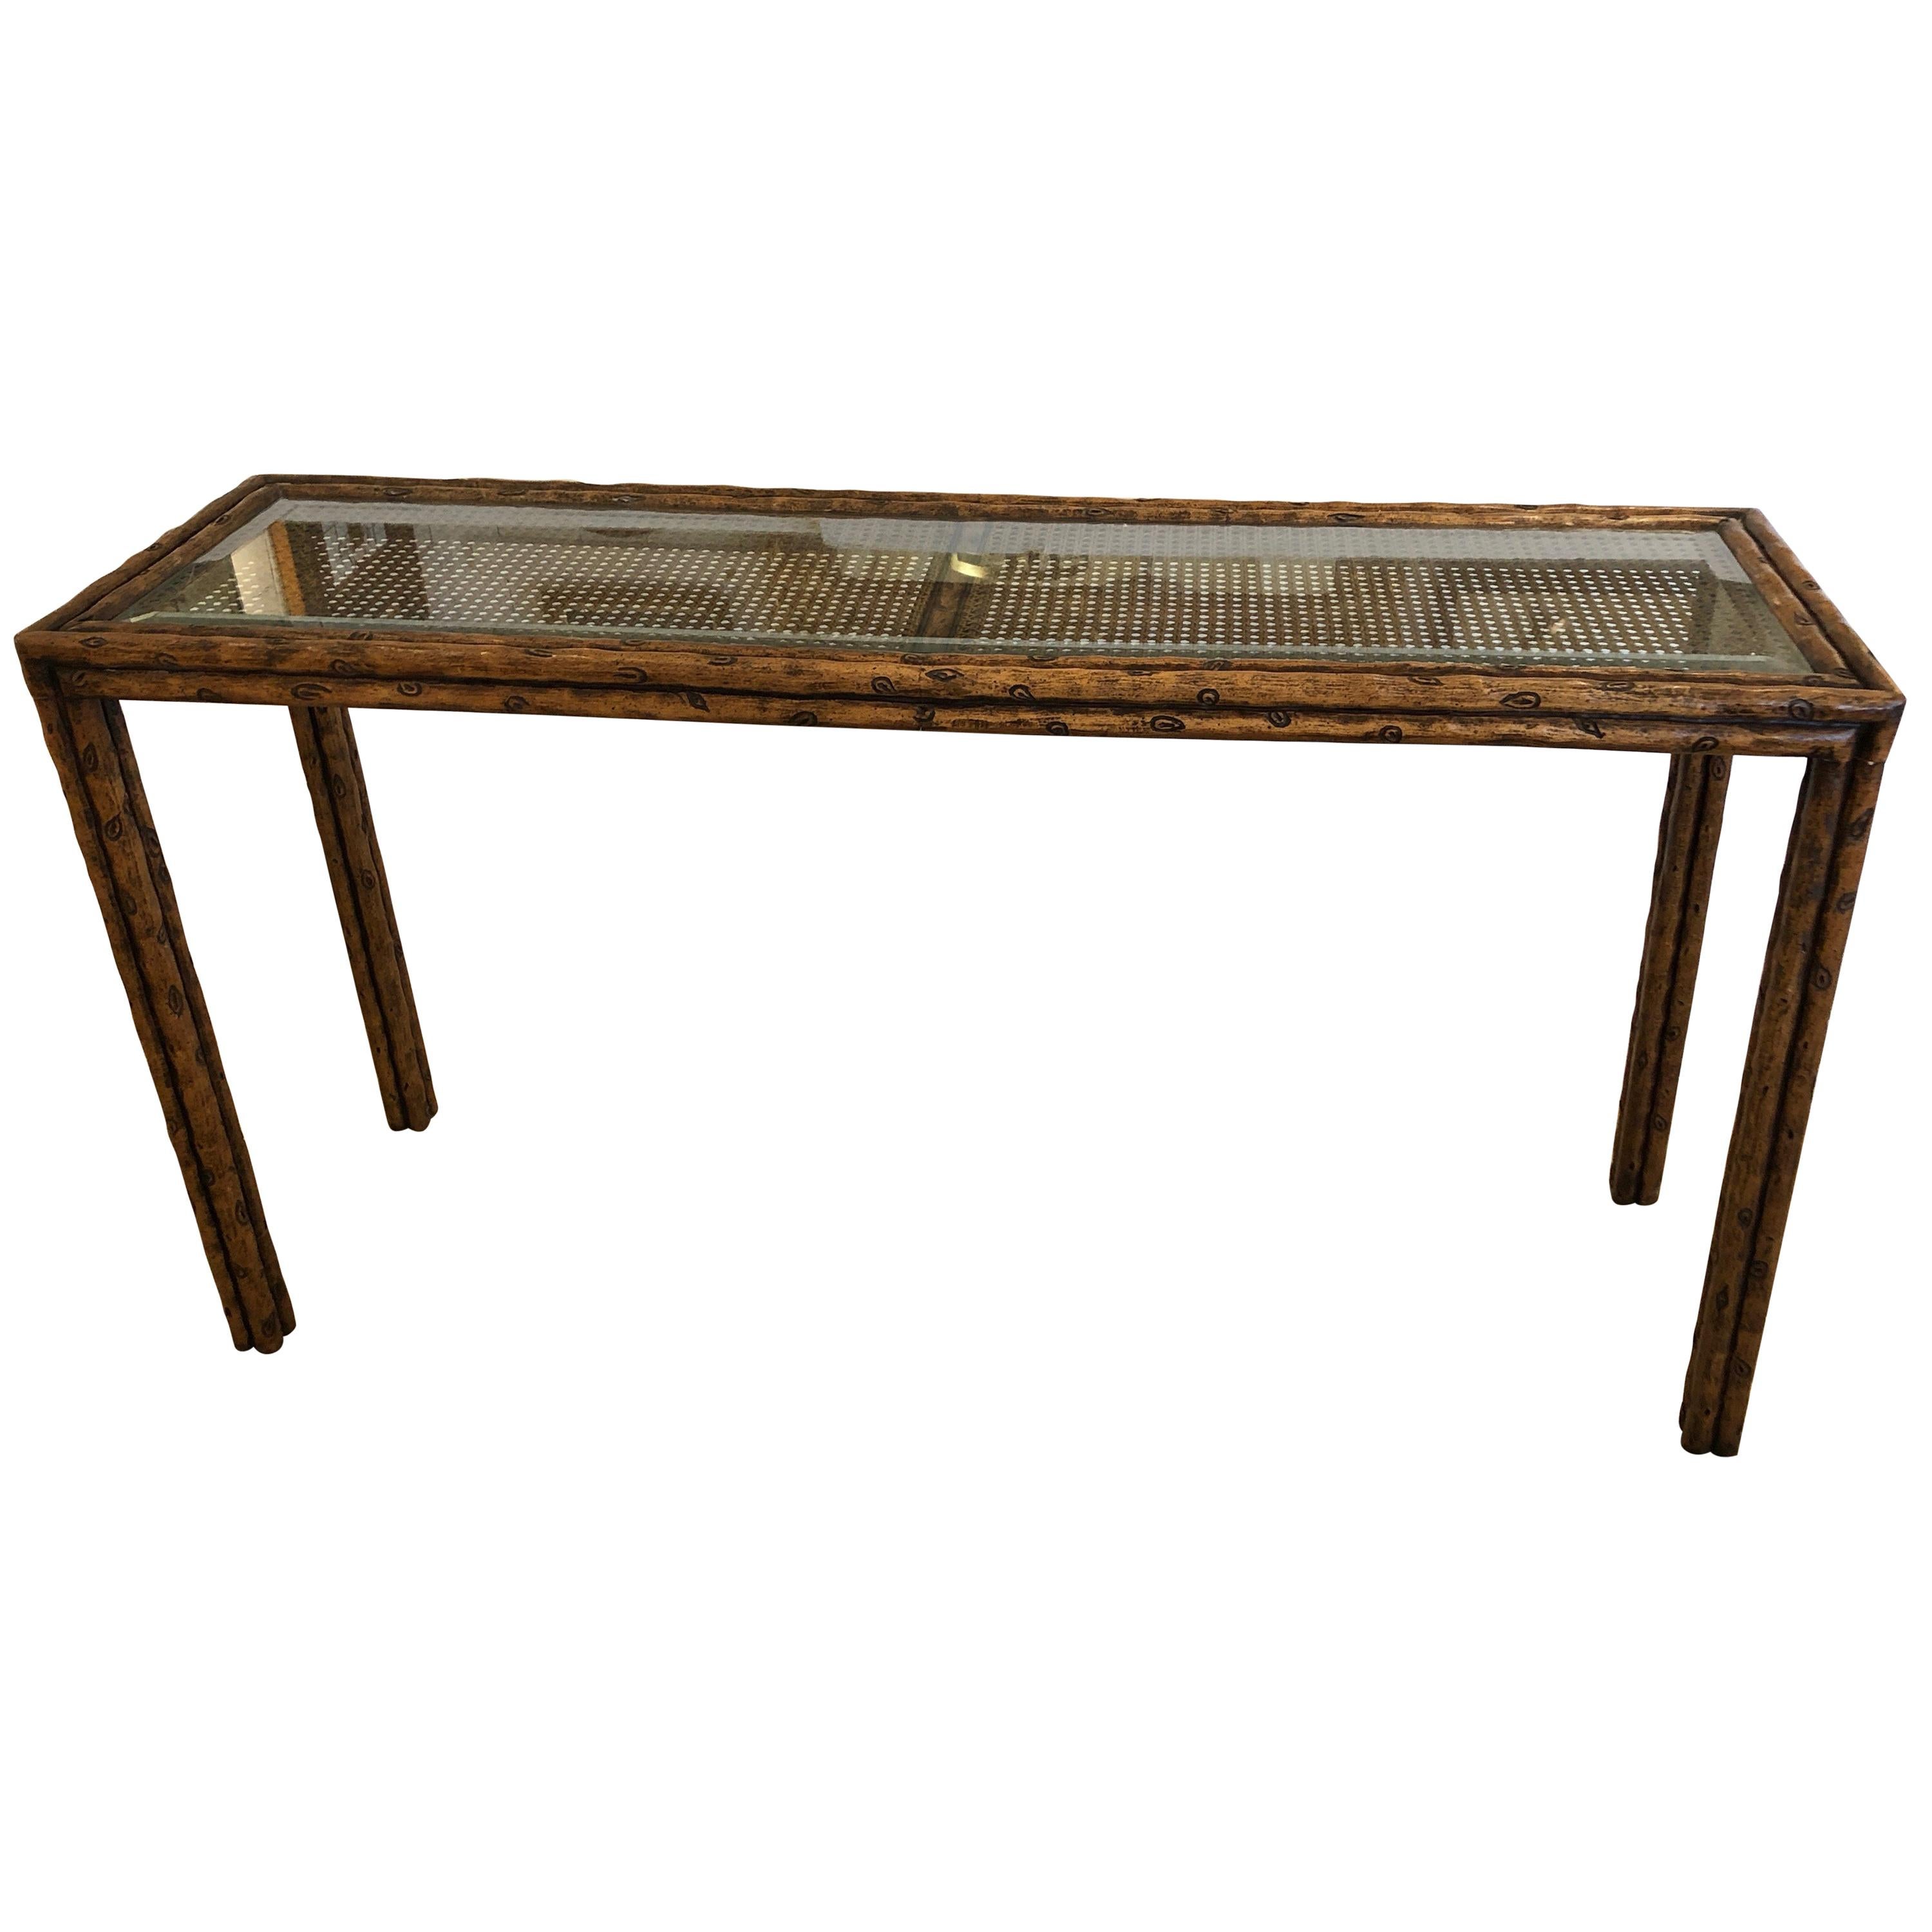 Handsome Mid-Century Modern Faux Bois and Caned Console Table